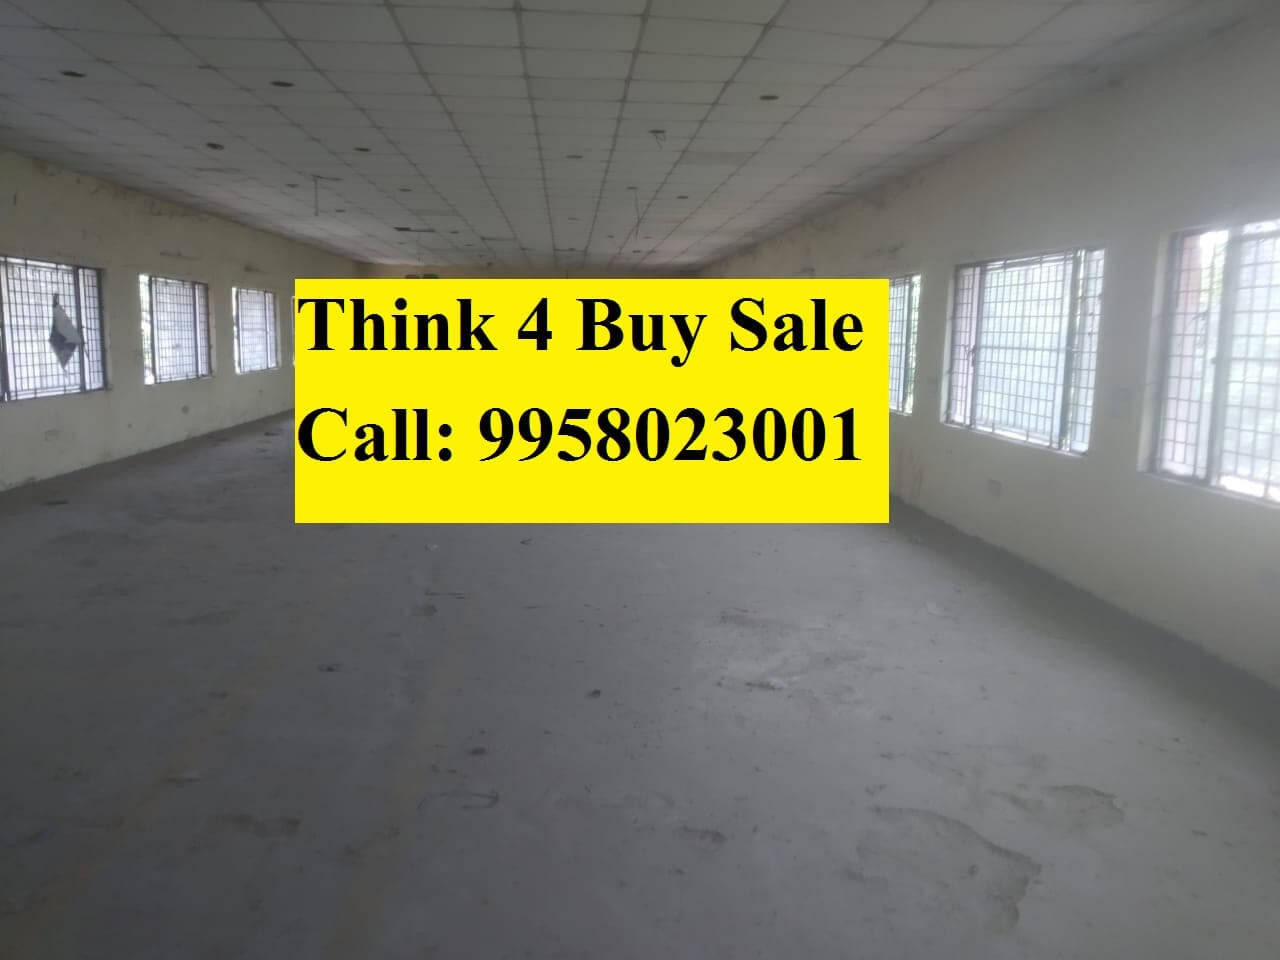 Warehouse for Rent in Sahibabad Industrial Area, Site 4